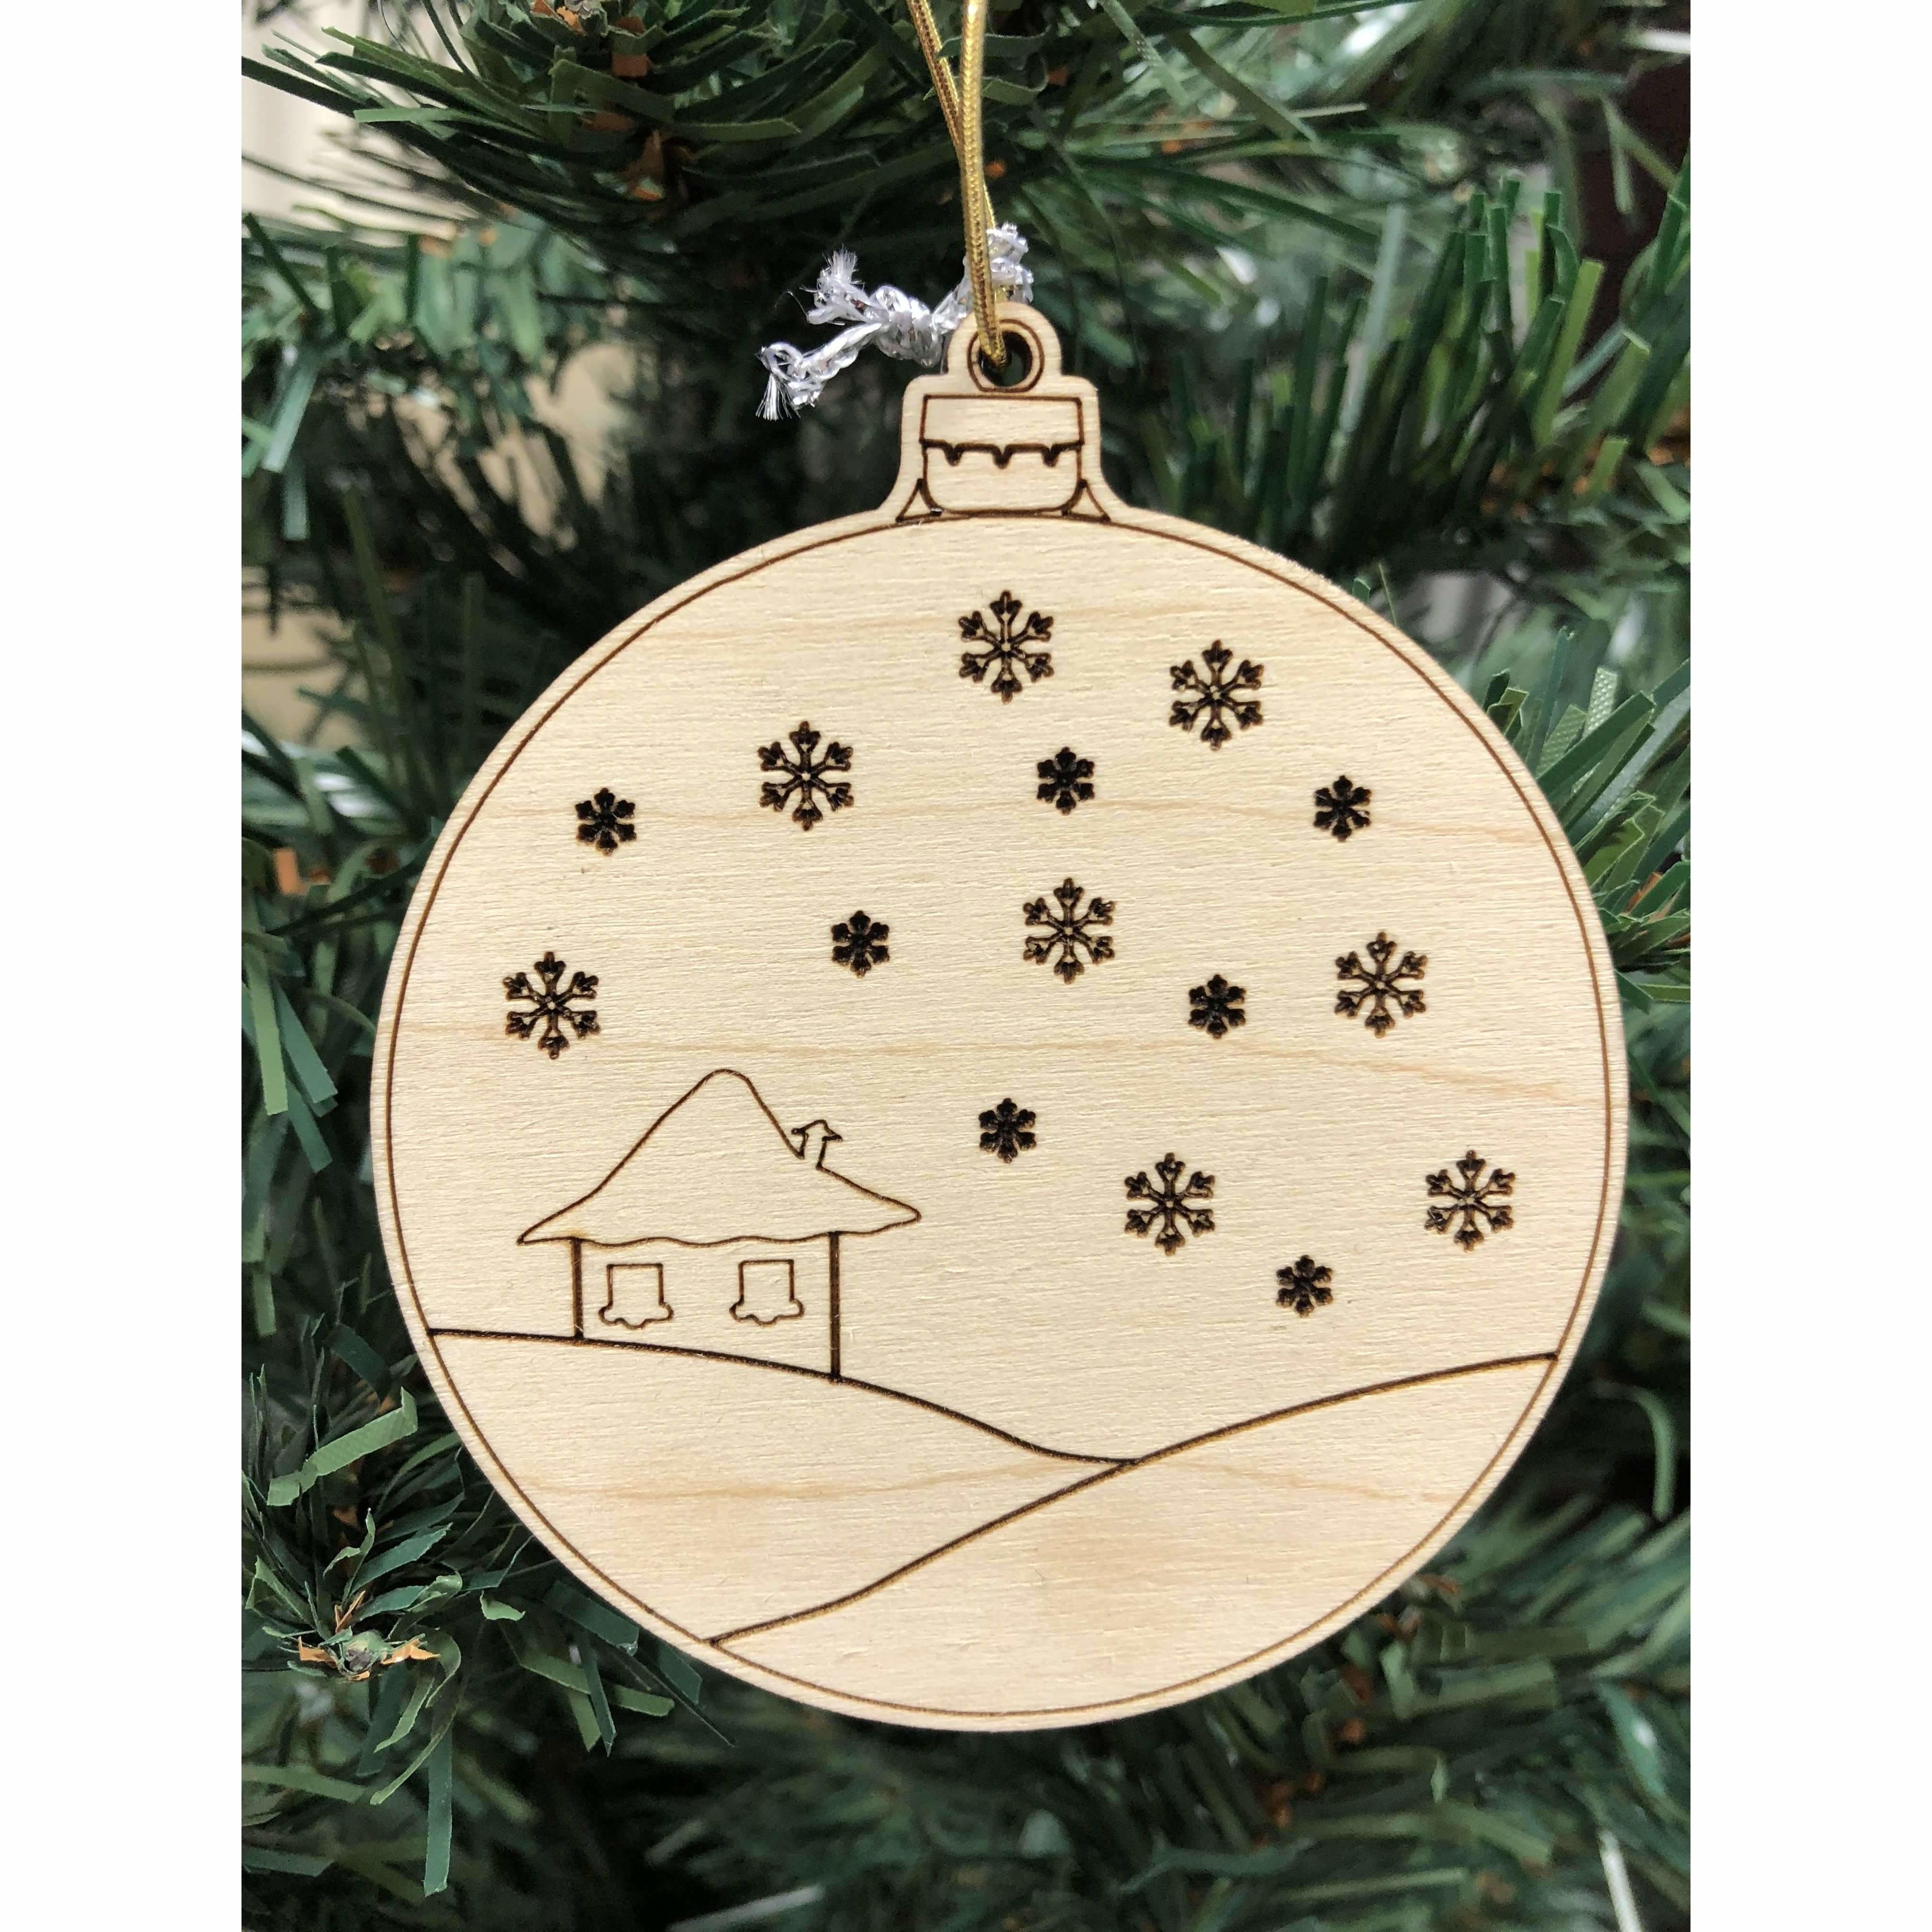 Red Berry Crafts Ltd:Snow Scene Wooden Christmas Bauble